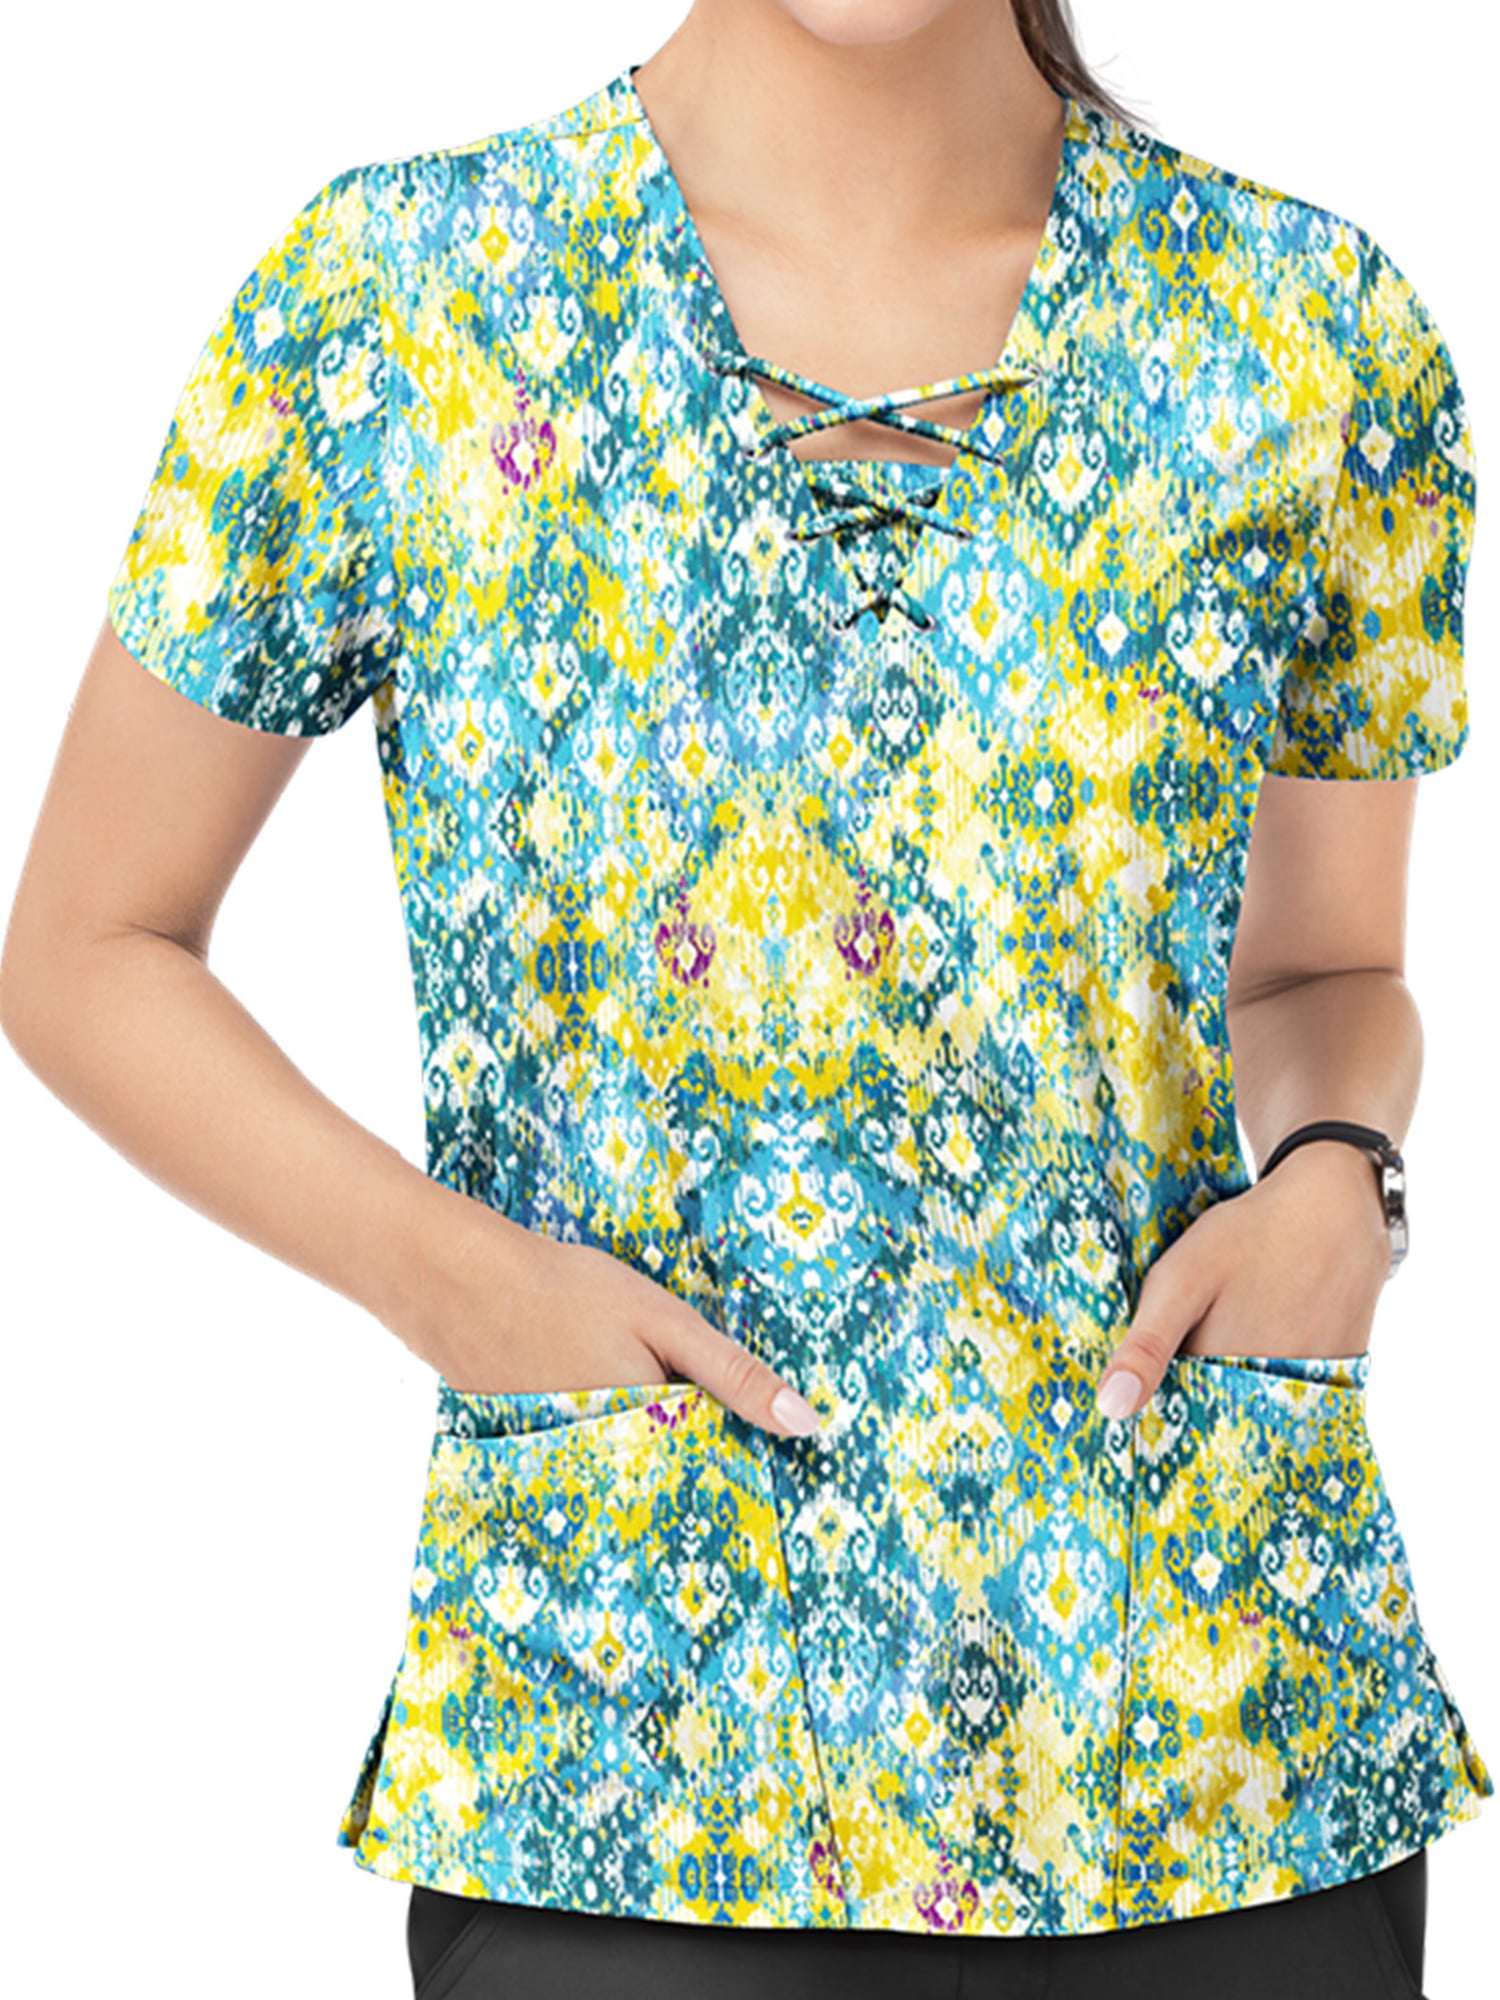 NEW Woman's size X-Small Blue Floral & Paisley Short Sleeve Scrub Top by MEDLINE